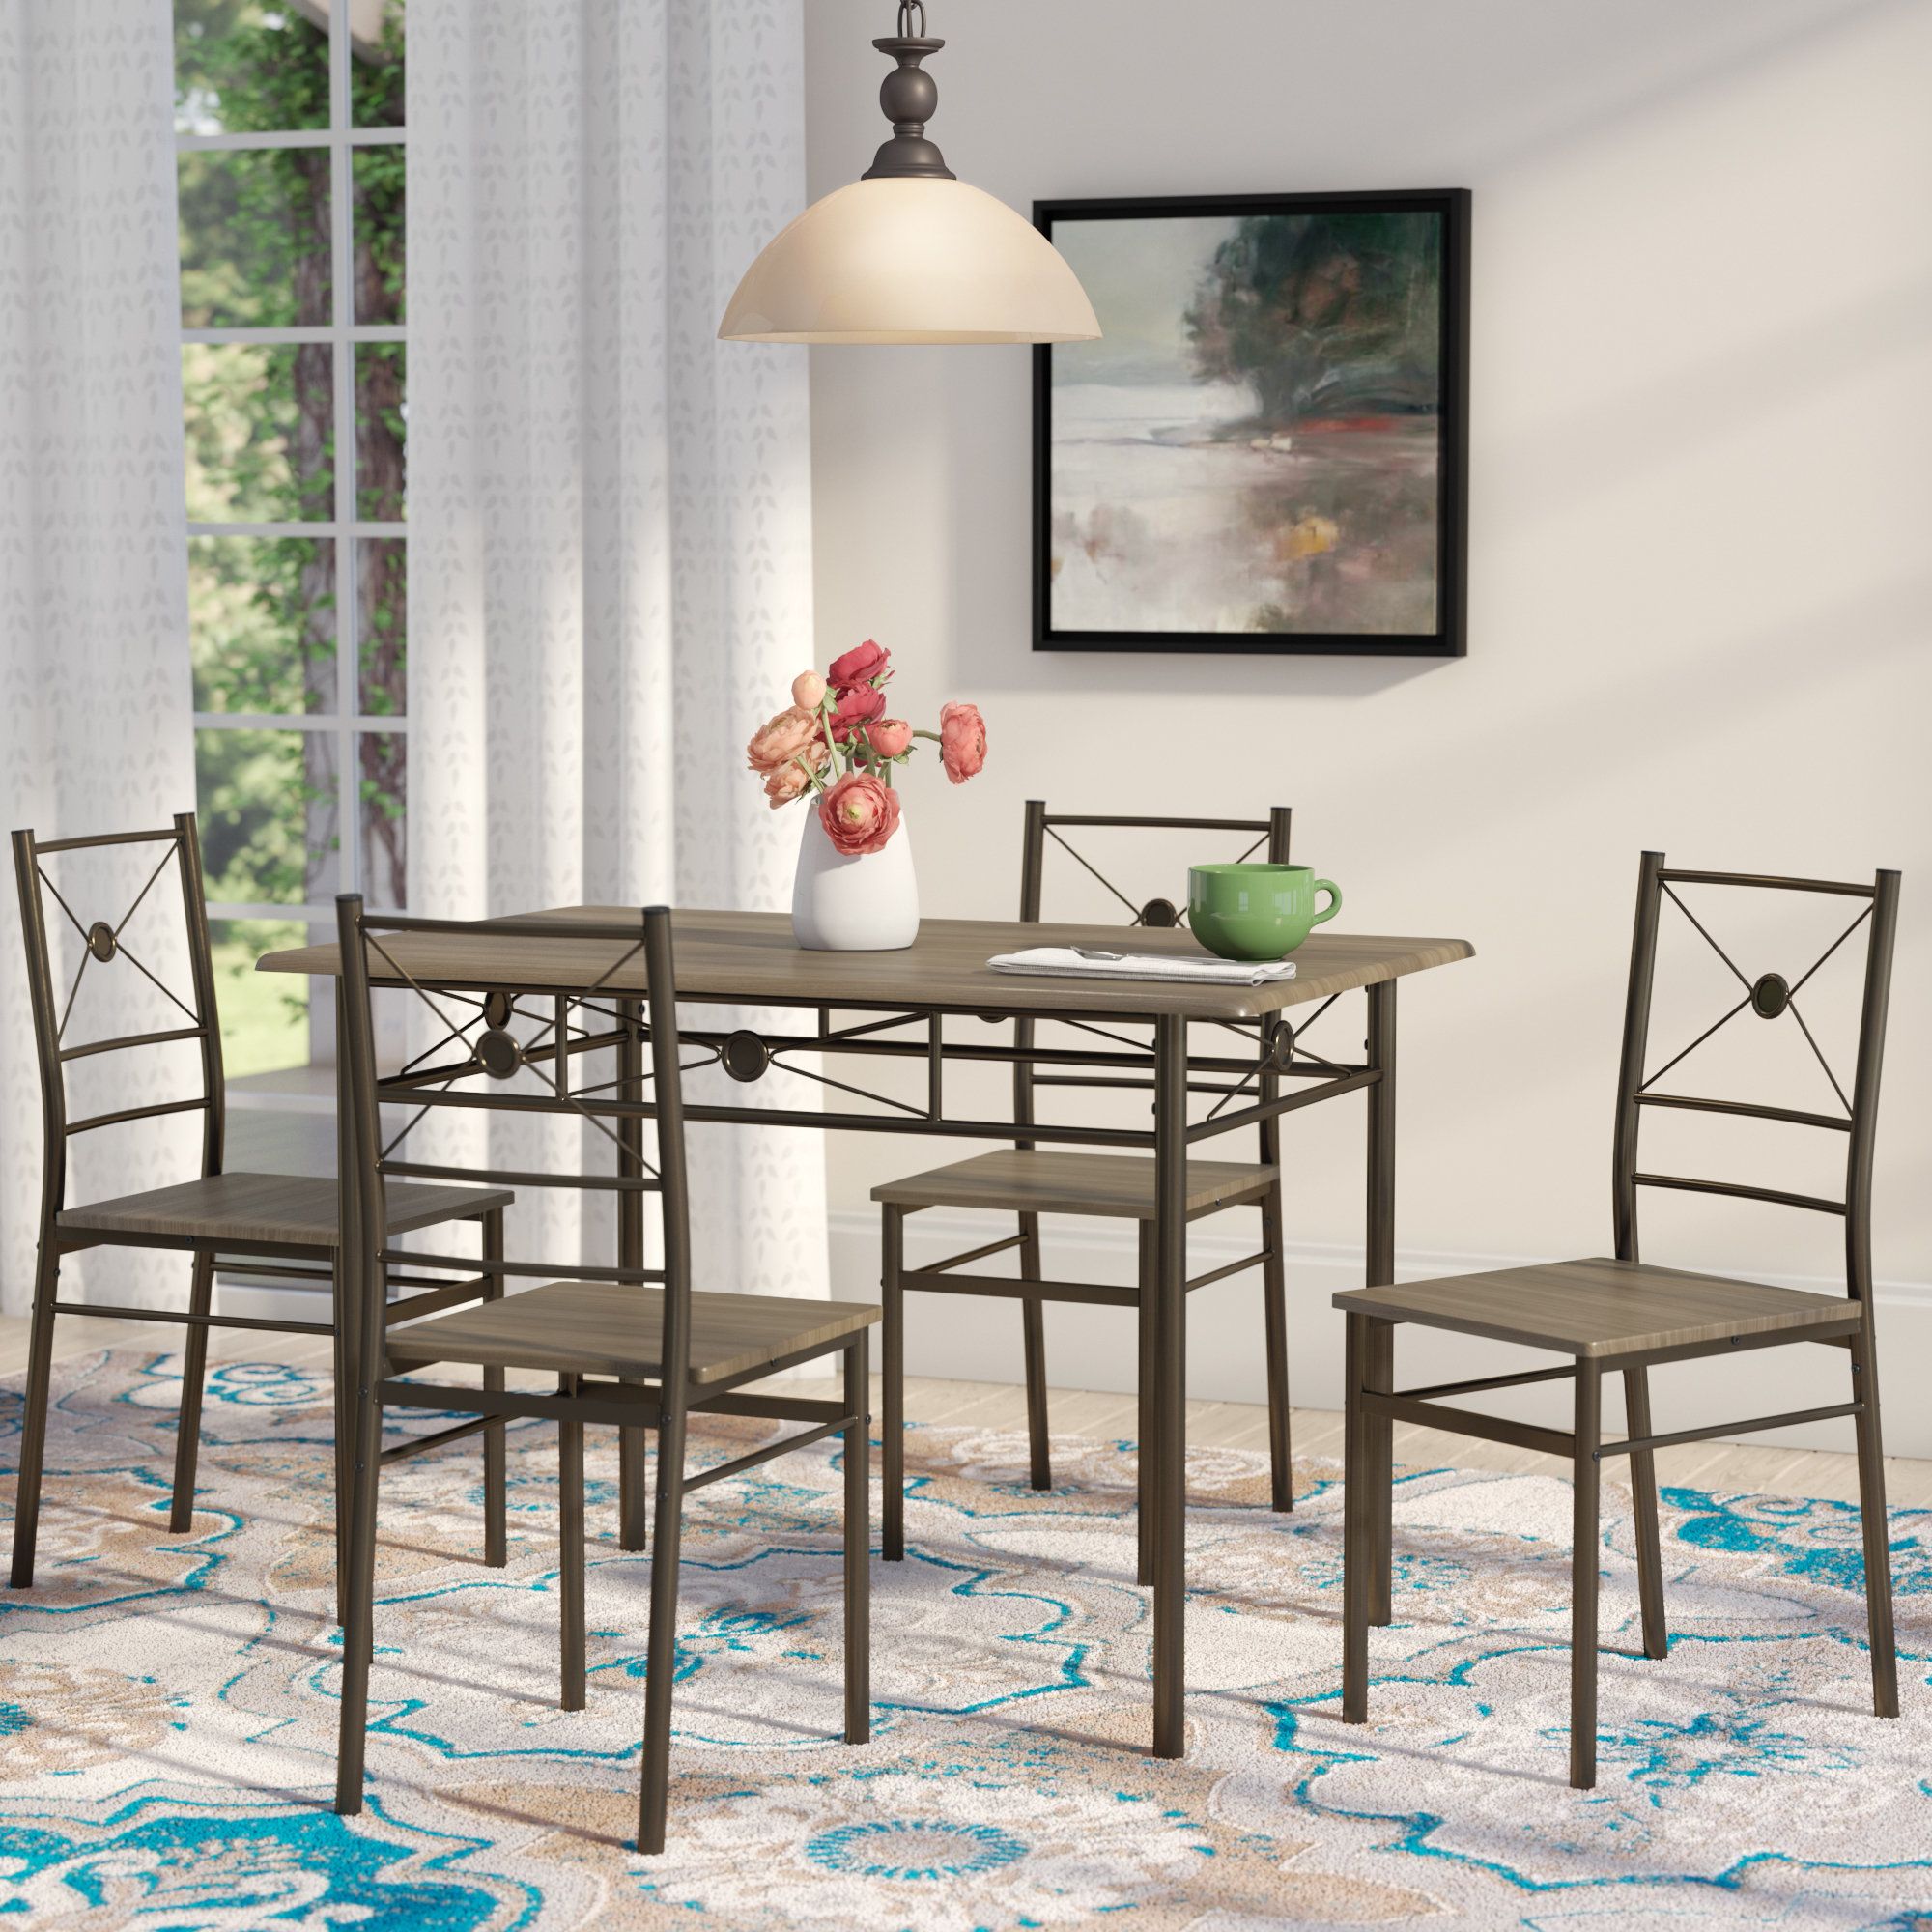 Most Popular Taulbee 5 Piece Dining Sets Throughout Andover Mills Kieffer 5 Piece Dining Set & Reviews (View 14 of 20)